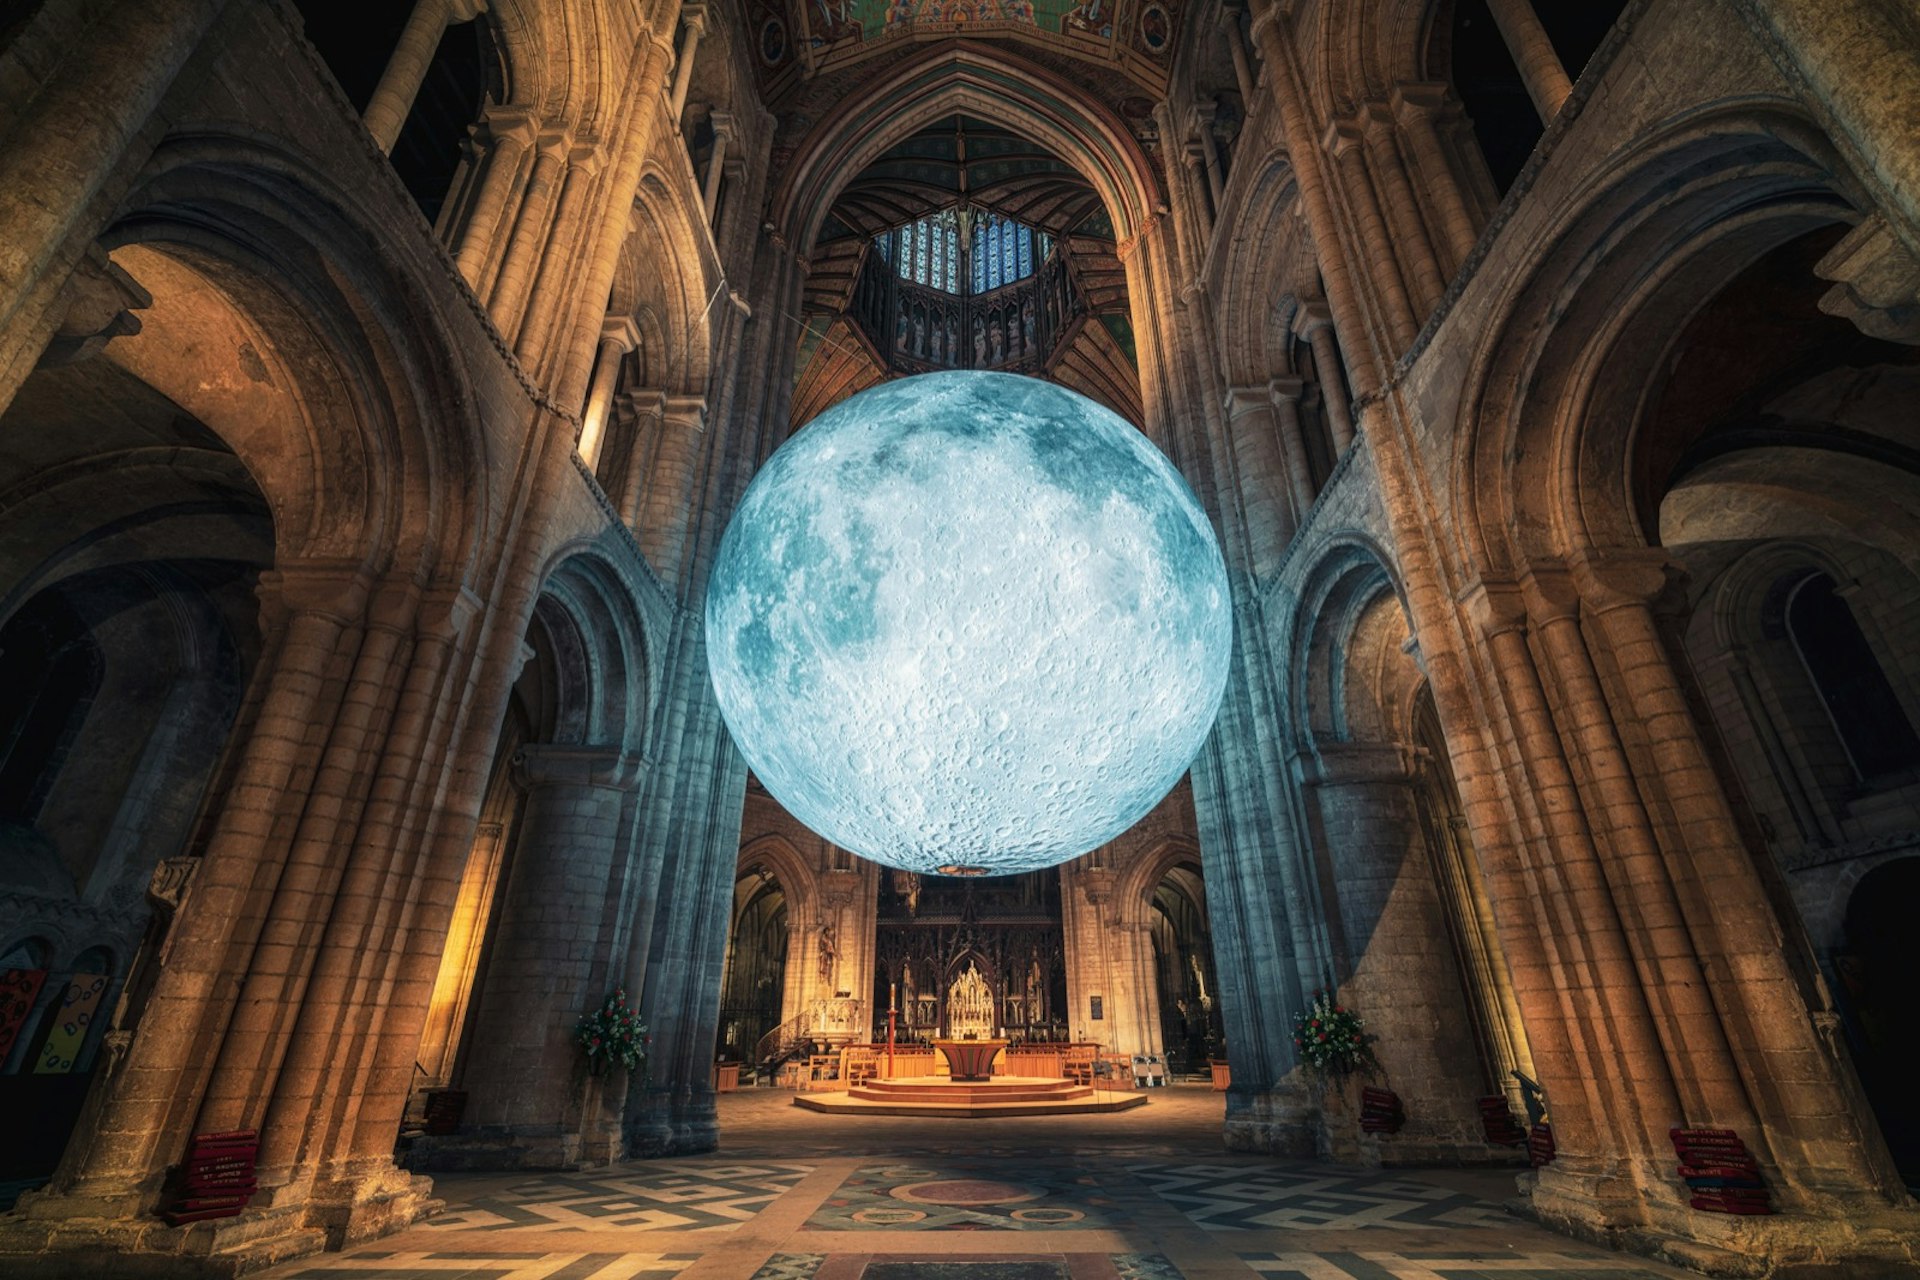 A huge glowing replica of the moon inside the softly lit vaults of a cathedral. The moon appears to be suspended in mid air, surrounded by grey stone columns and stained glass windows. The altar of the church is visible in the background.